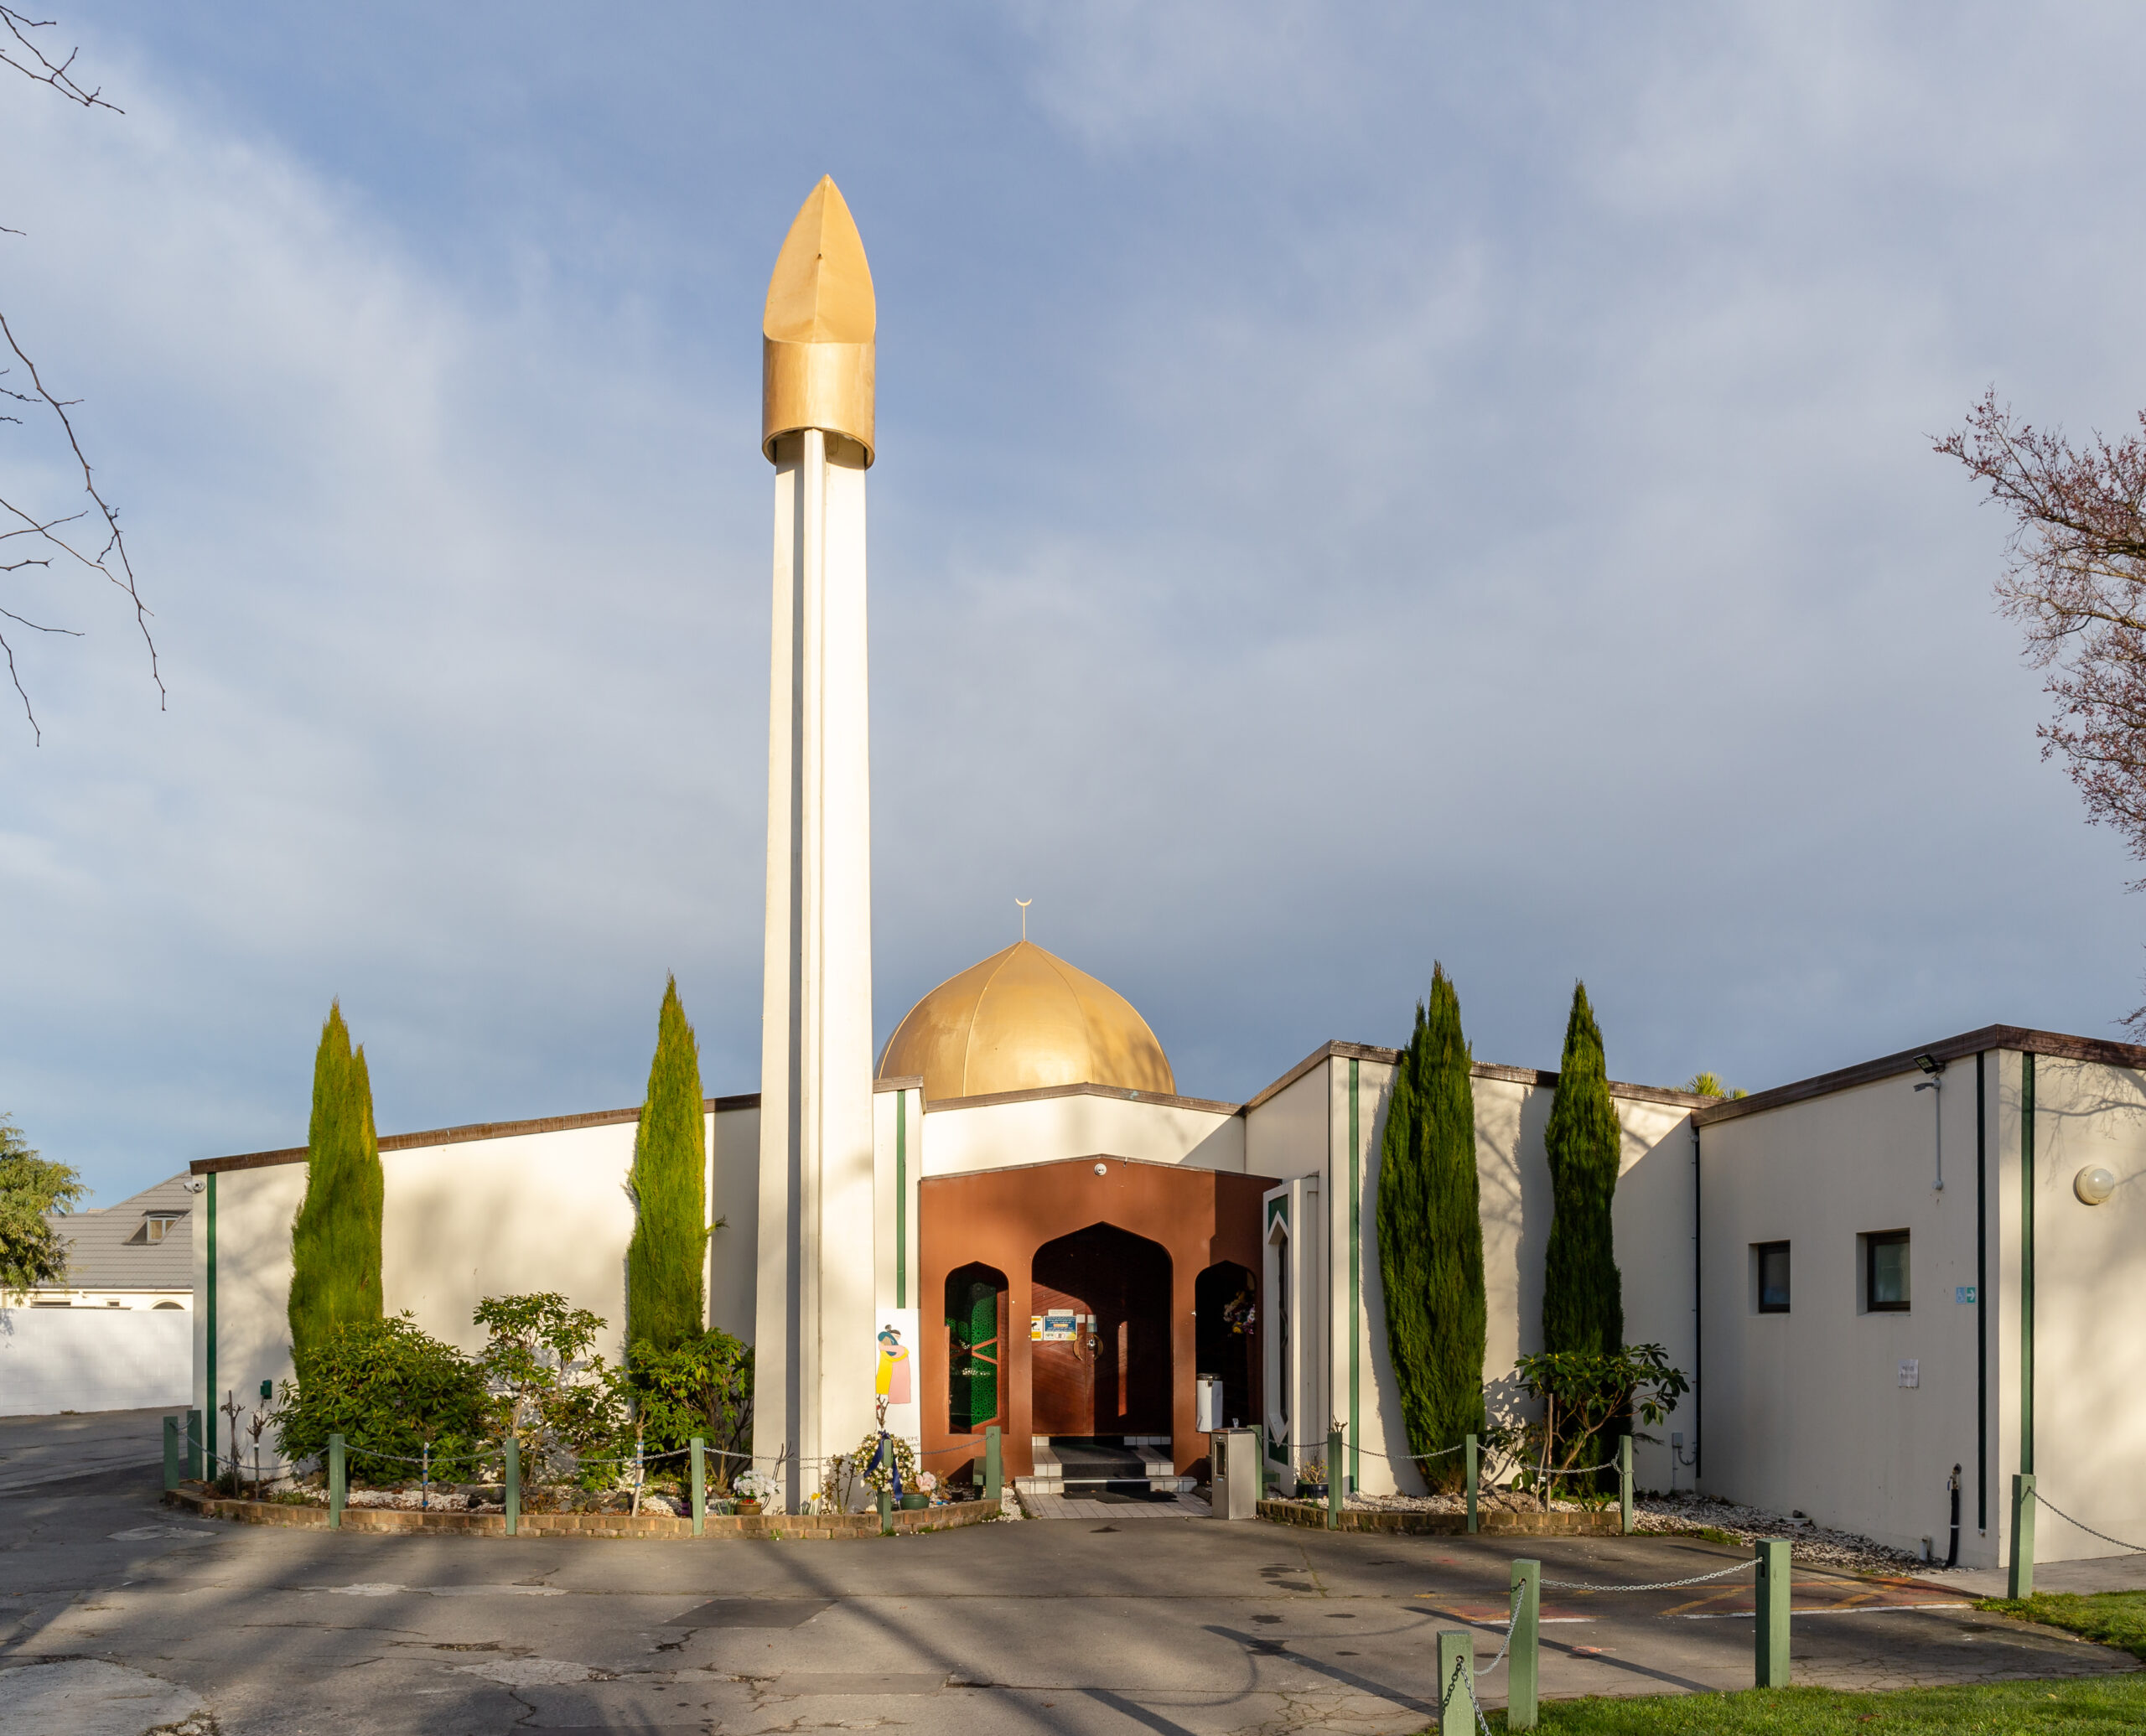 Profiling the Actor In The Christchurch Mosque Shootings: A Radicalisation Perspective